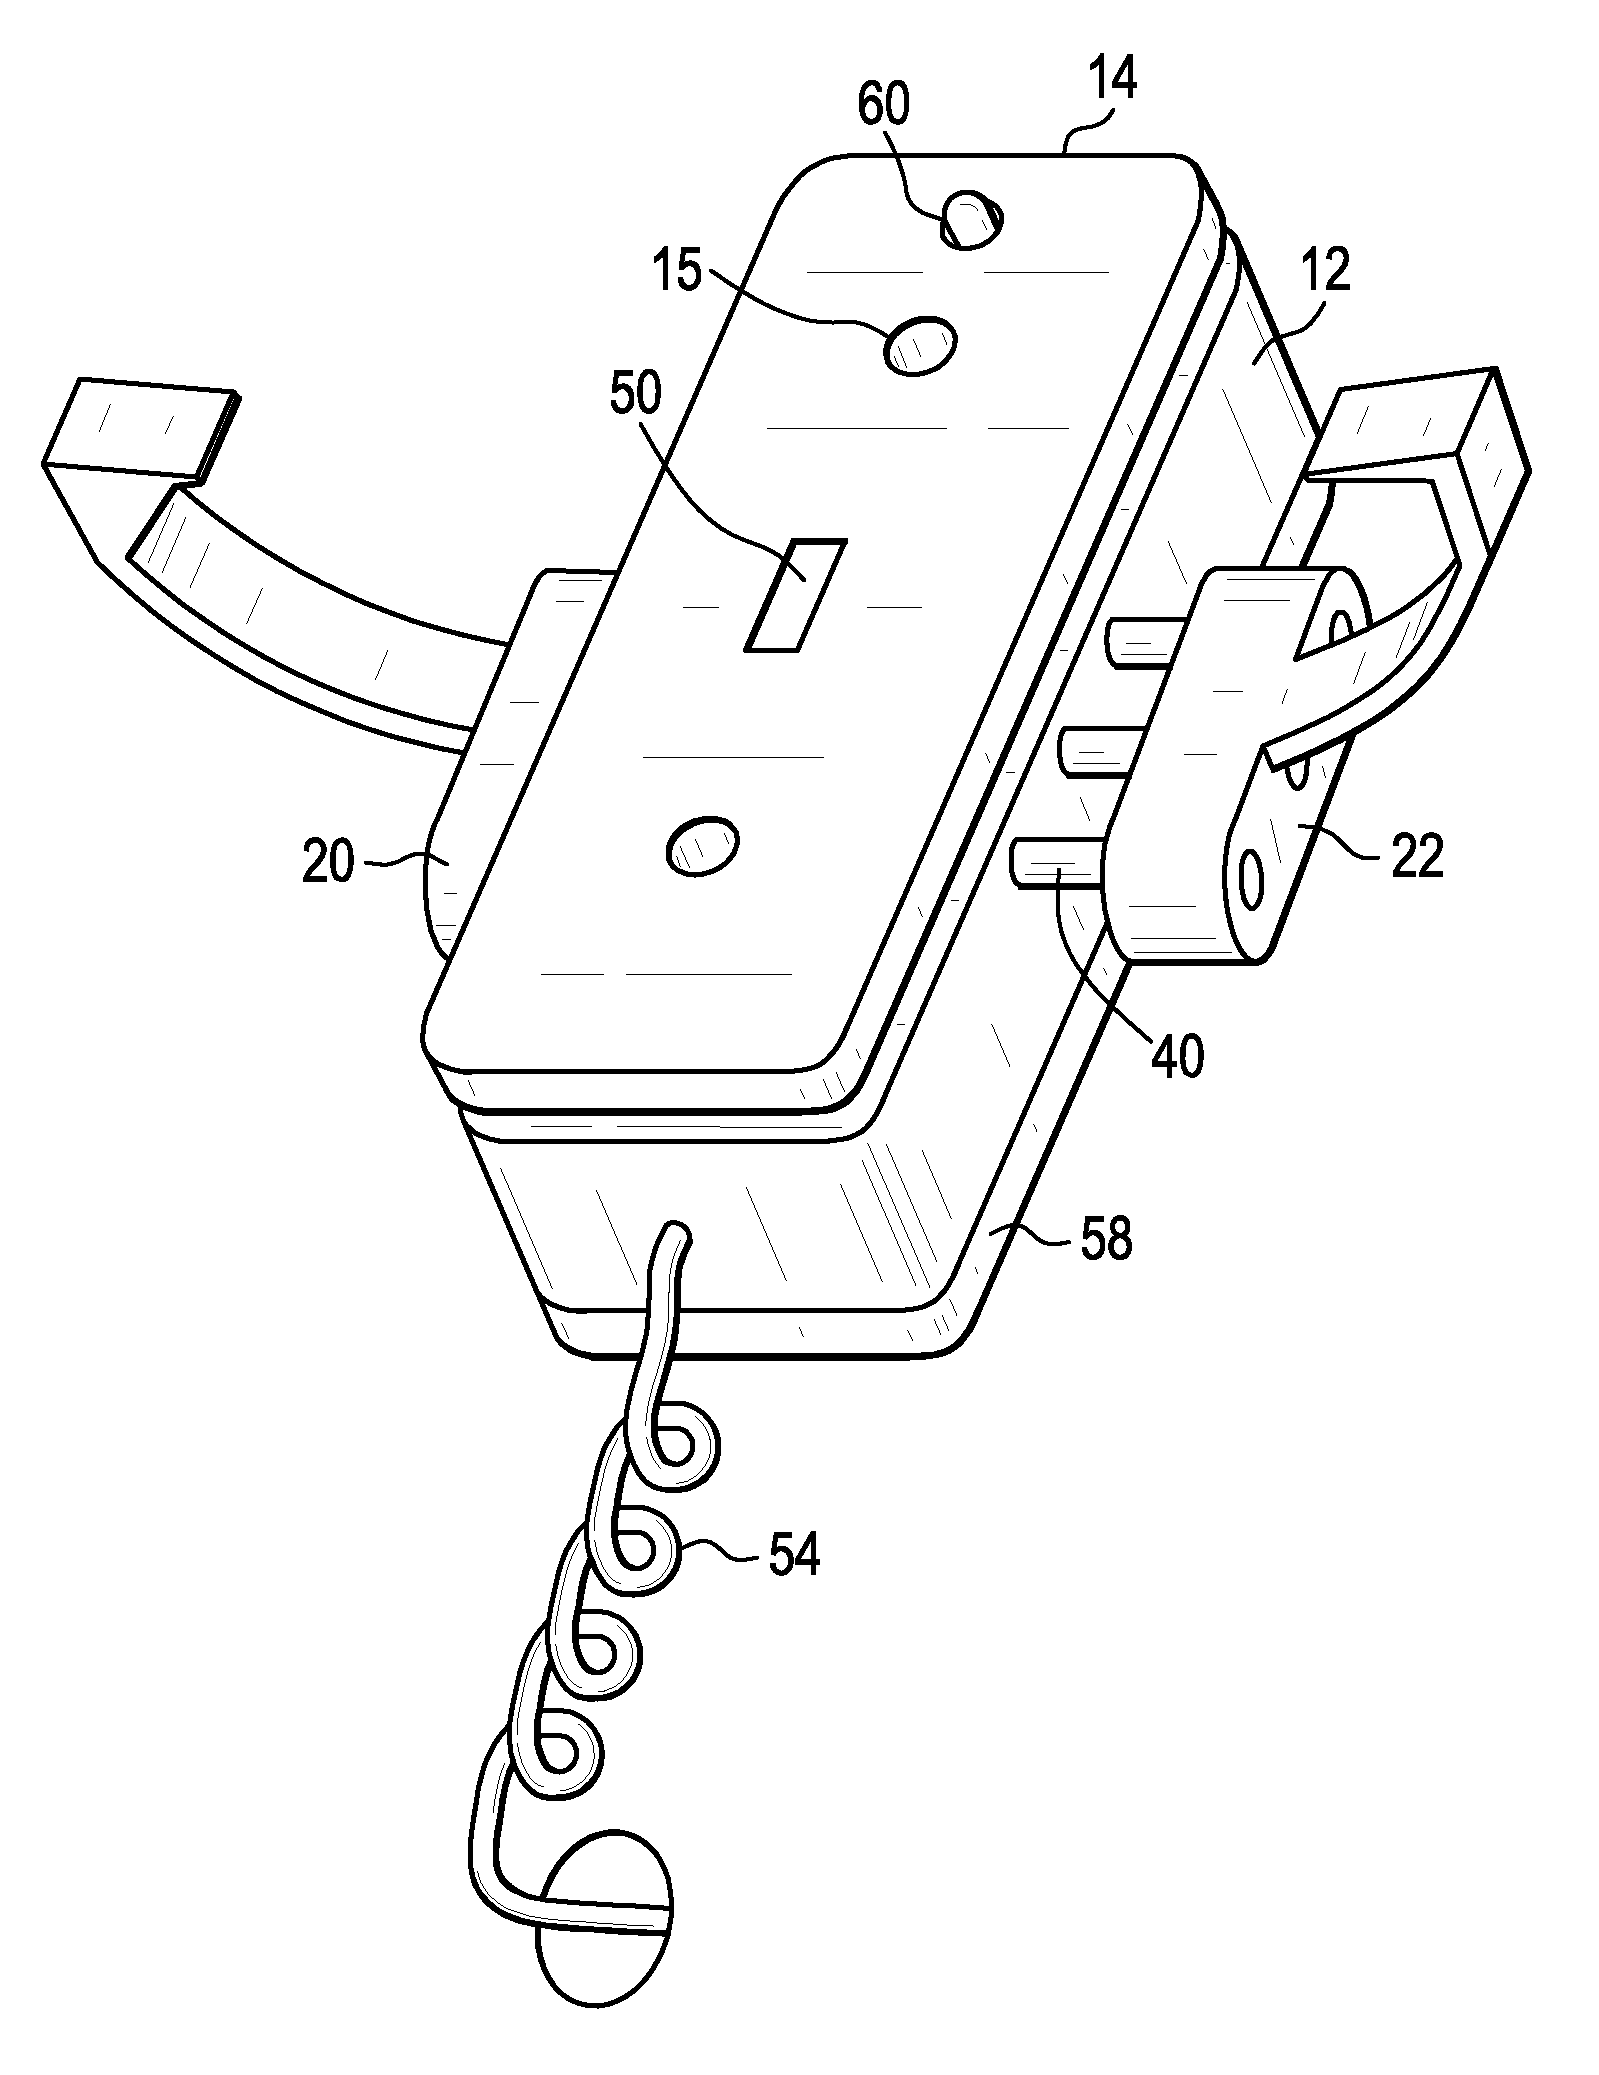 Security device for functional display, security, and charging of handheld electronic devices